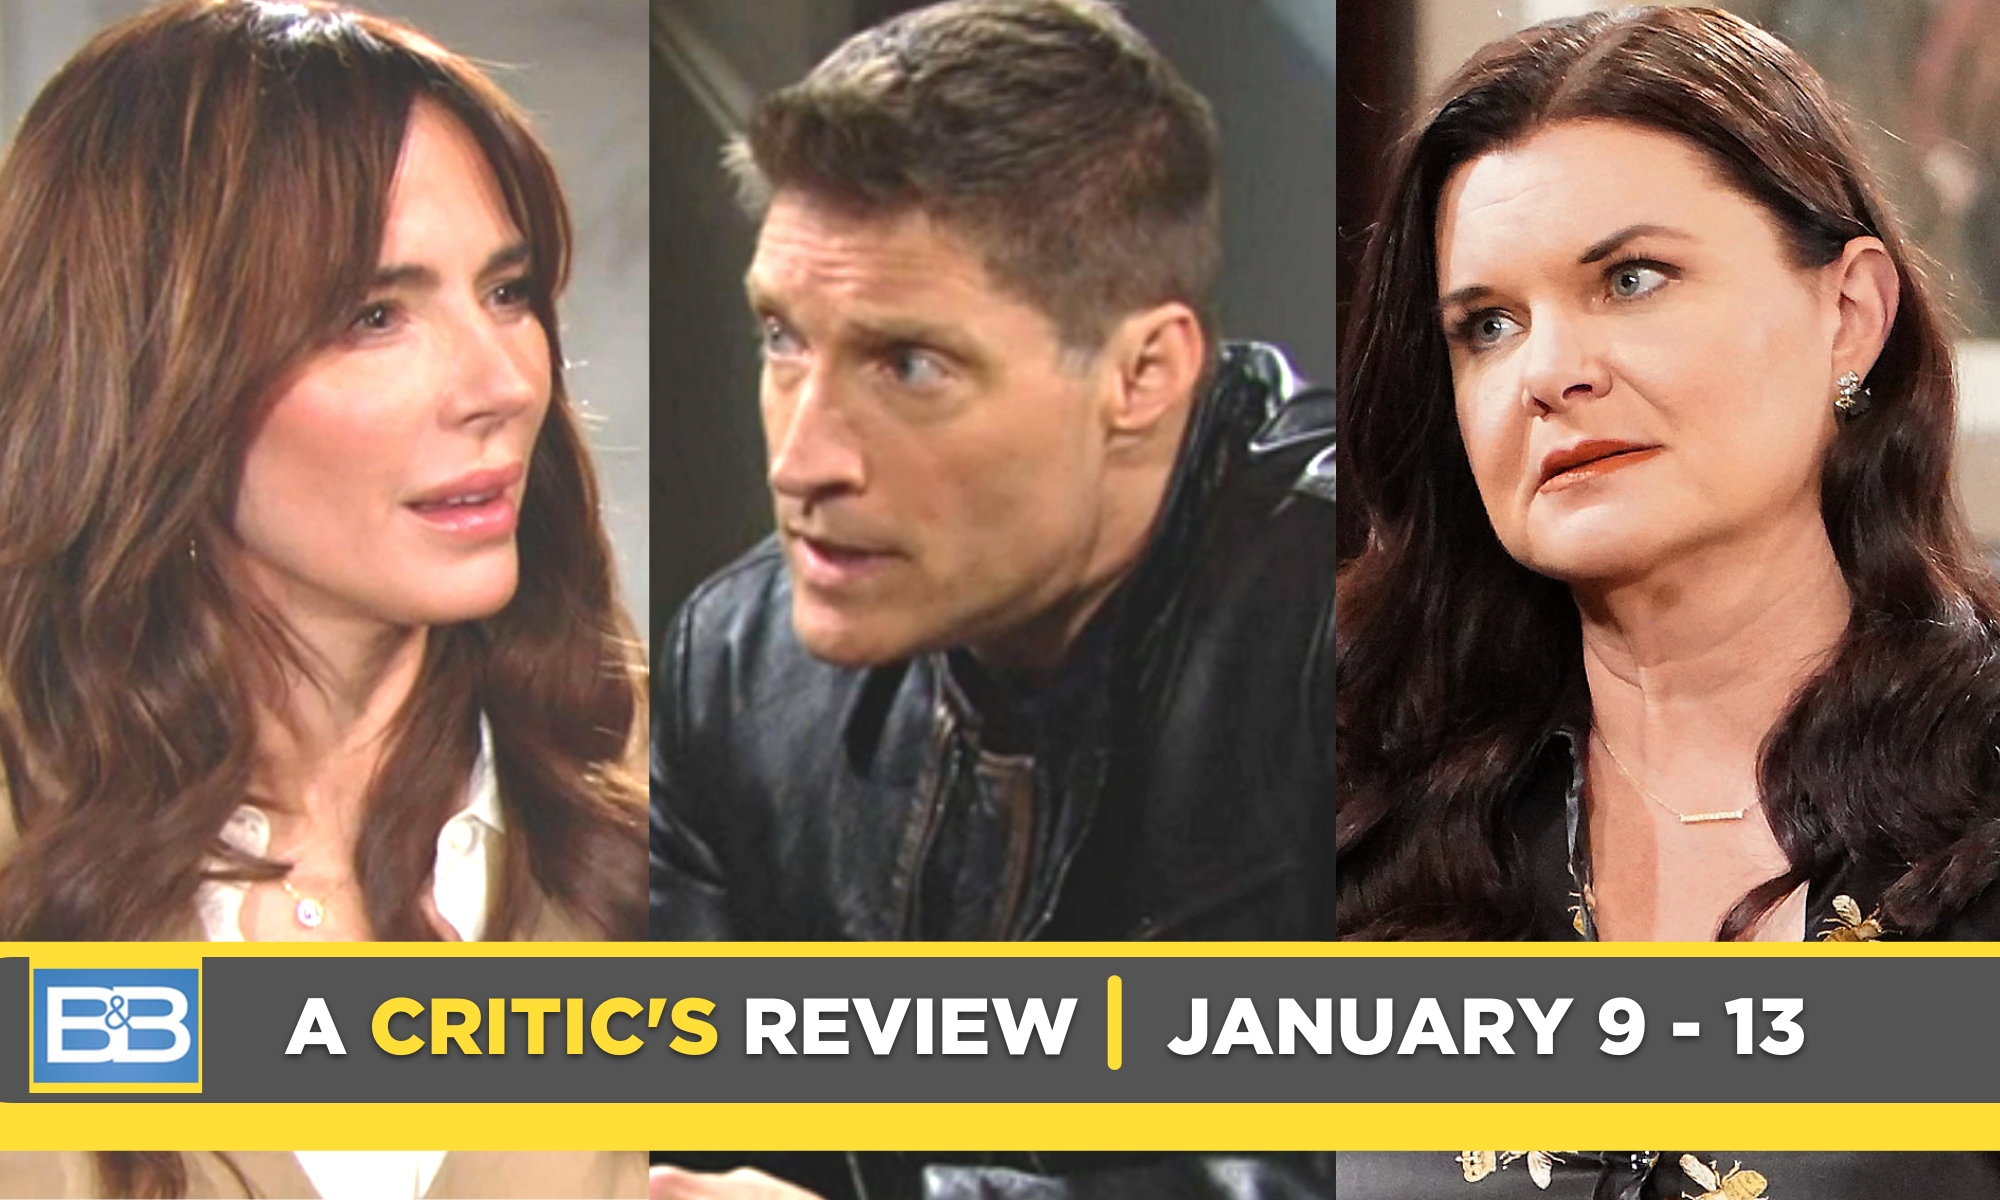 bold and the beautiful critics review shows taylor, deacon, katie the week of January 9, 2023